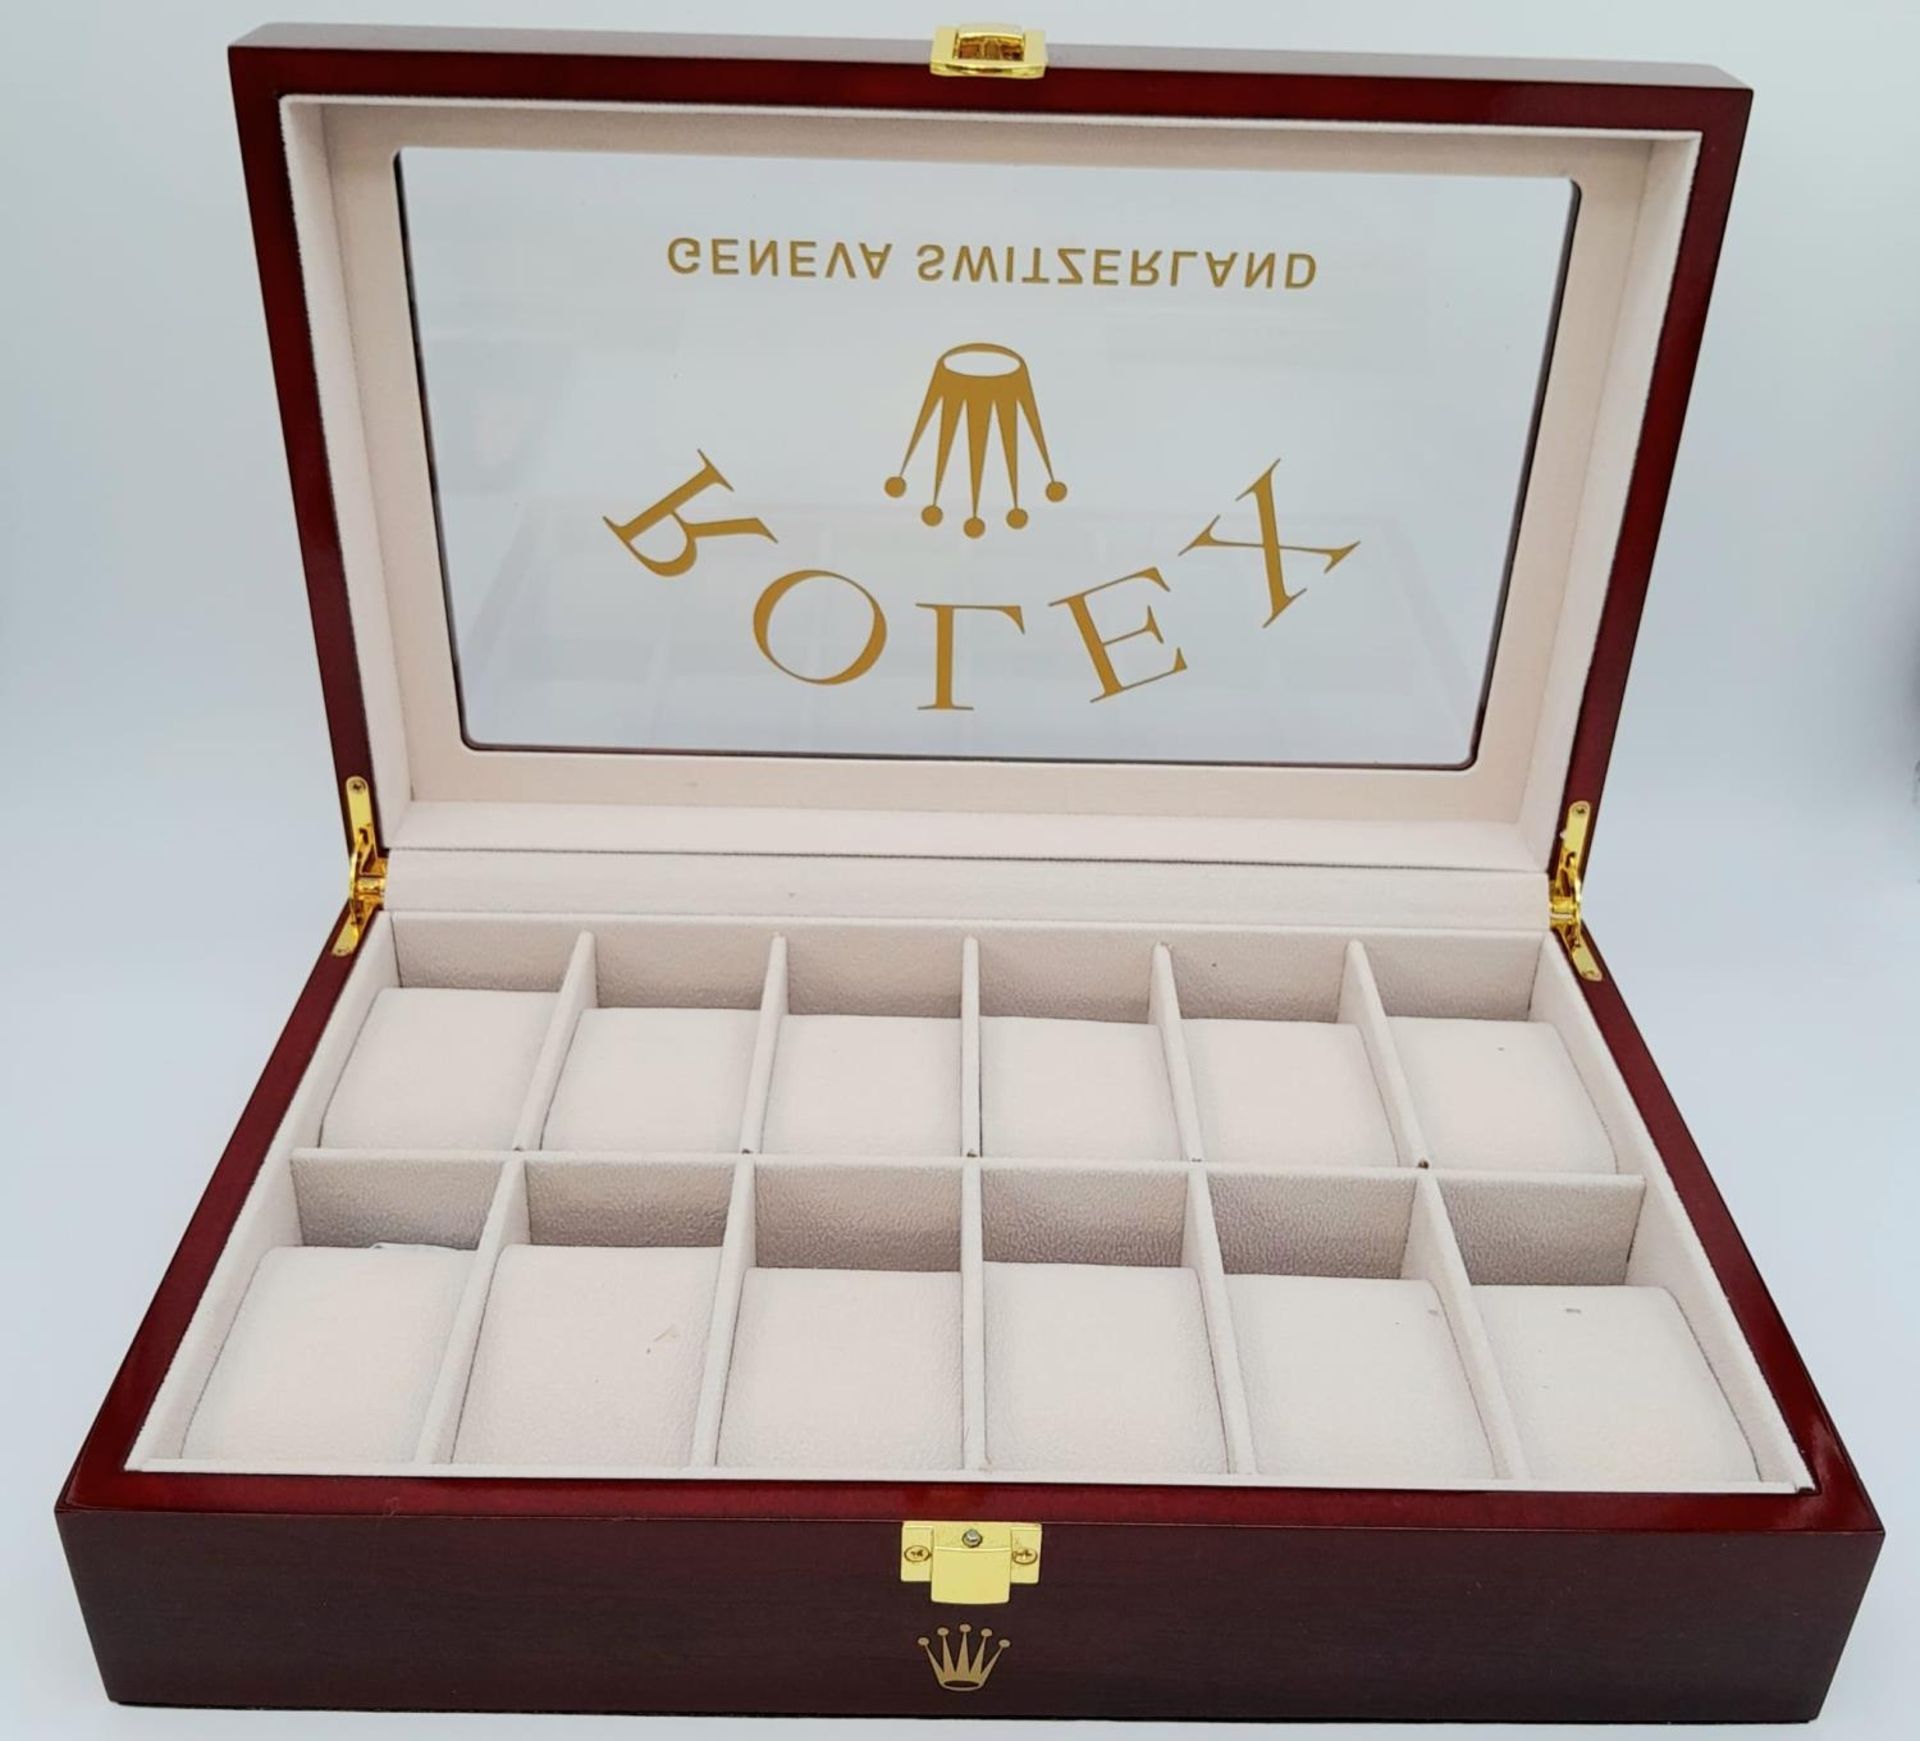 A high-quality ROLEX wooden watch case for 12 watches, made from high gloss cherry veneer and